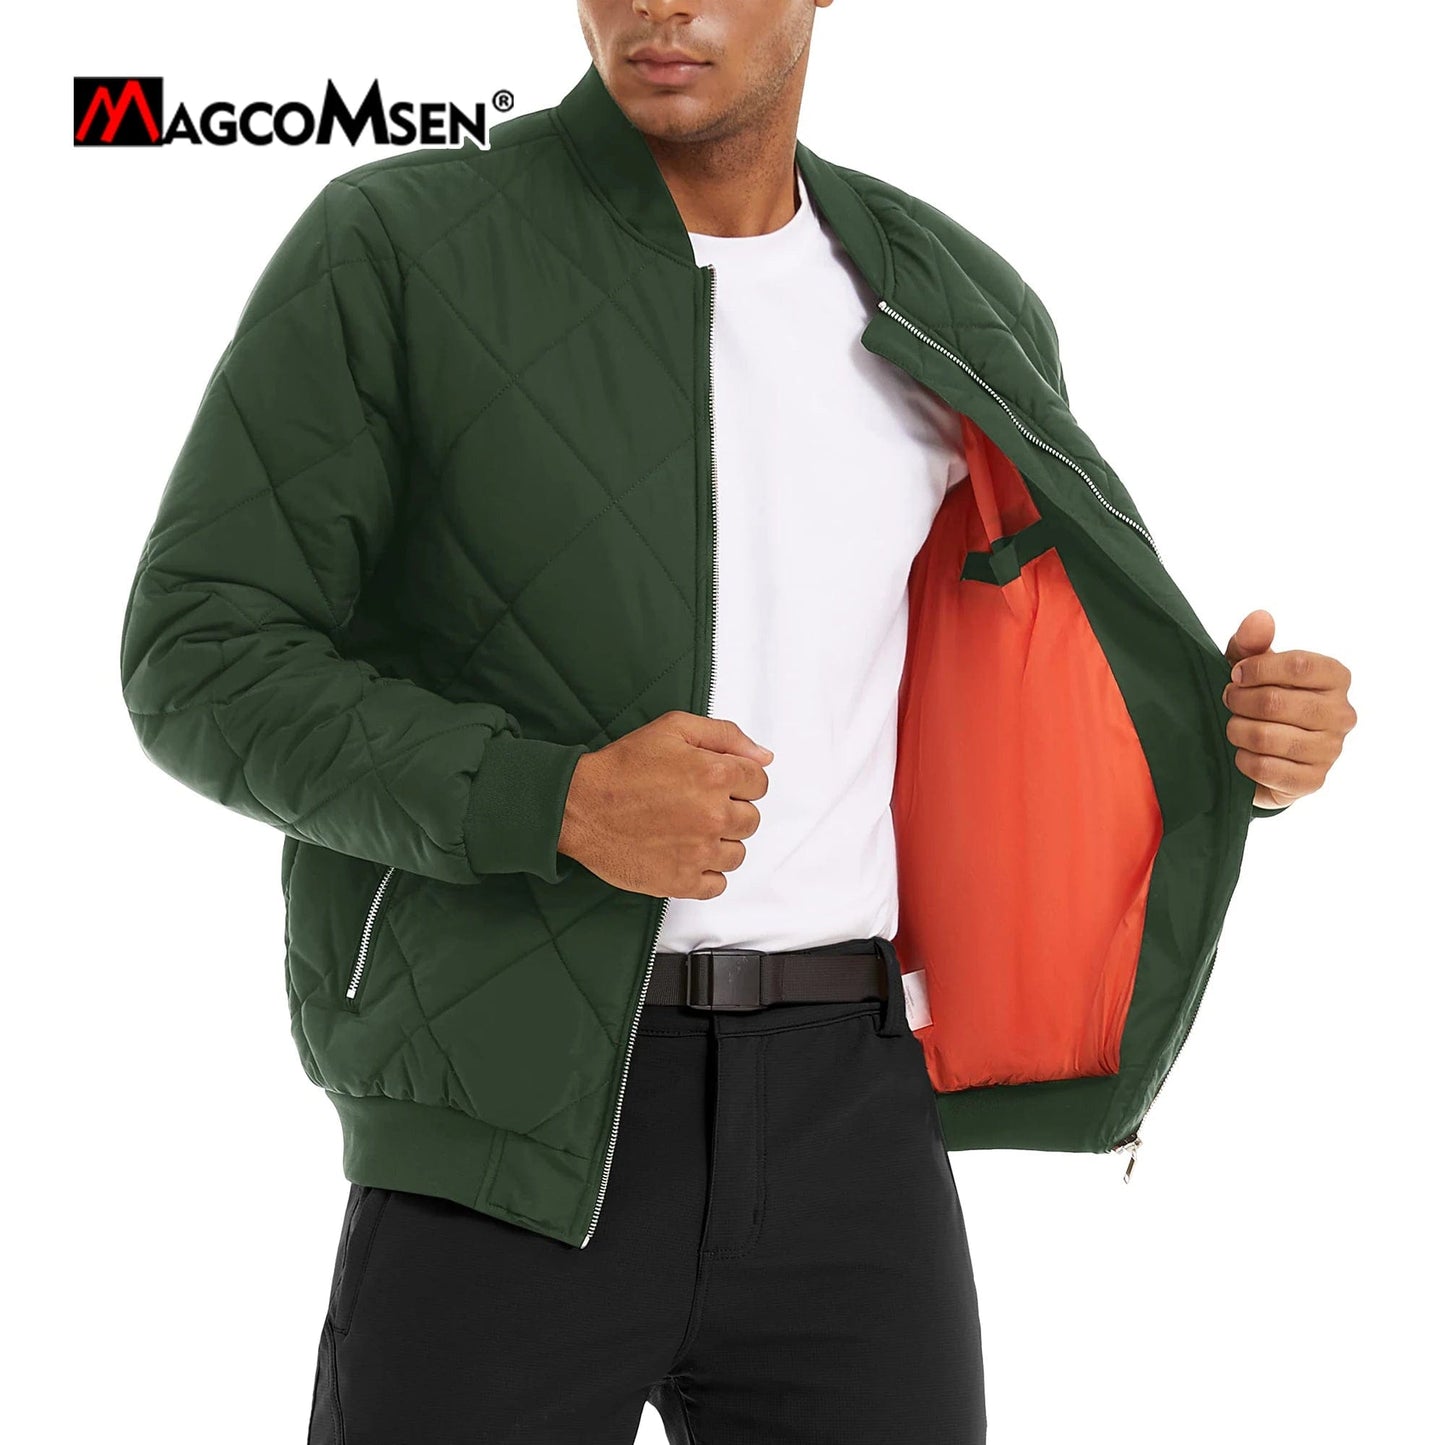 MAGCOMSEN Men's Casual Aviator Jackets Autumn Thicken Insulated Full Zipper Coats Windproof Jacket for Going Out